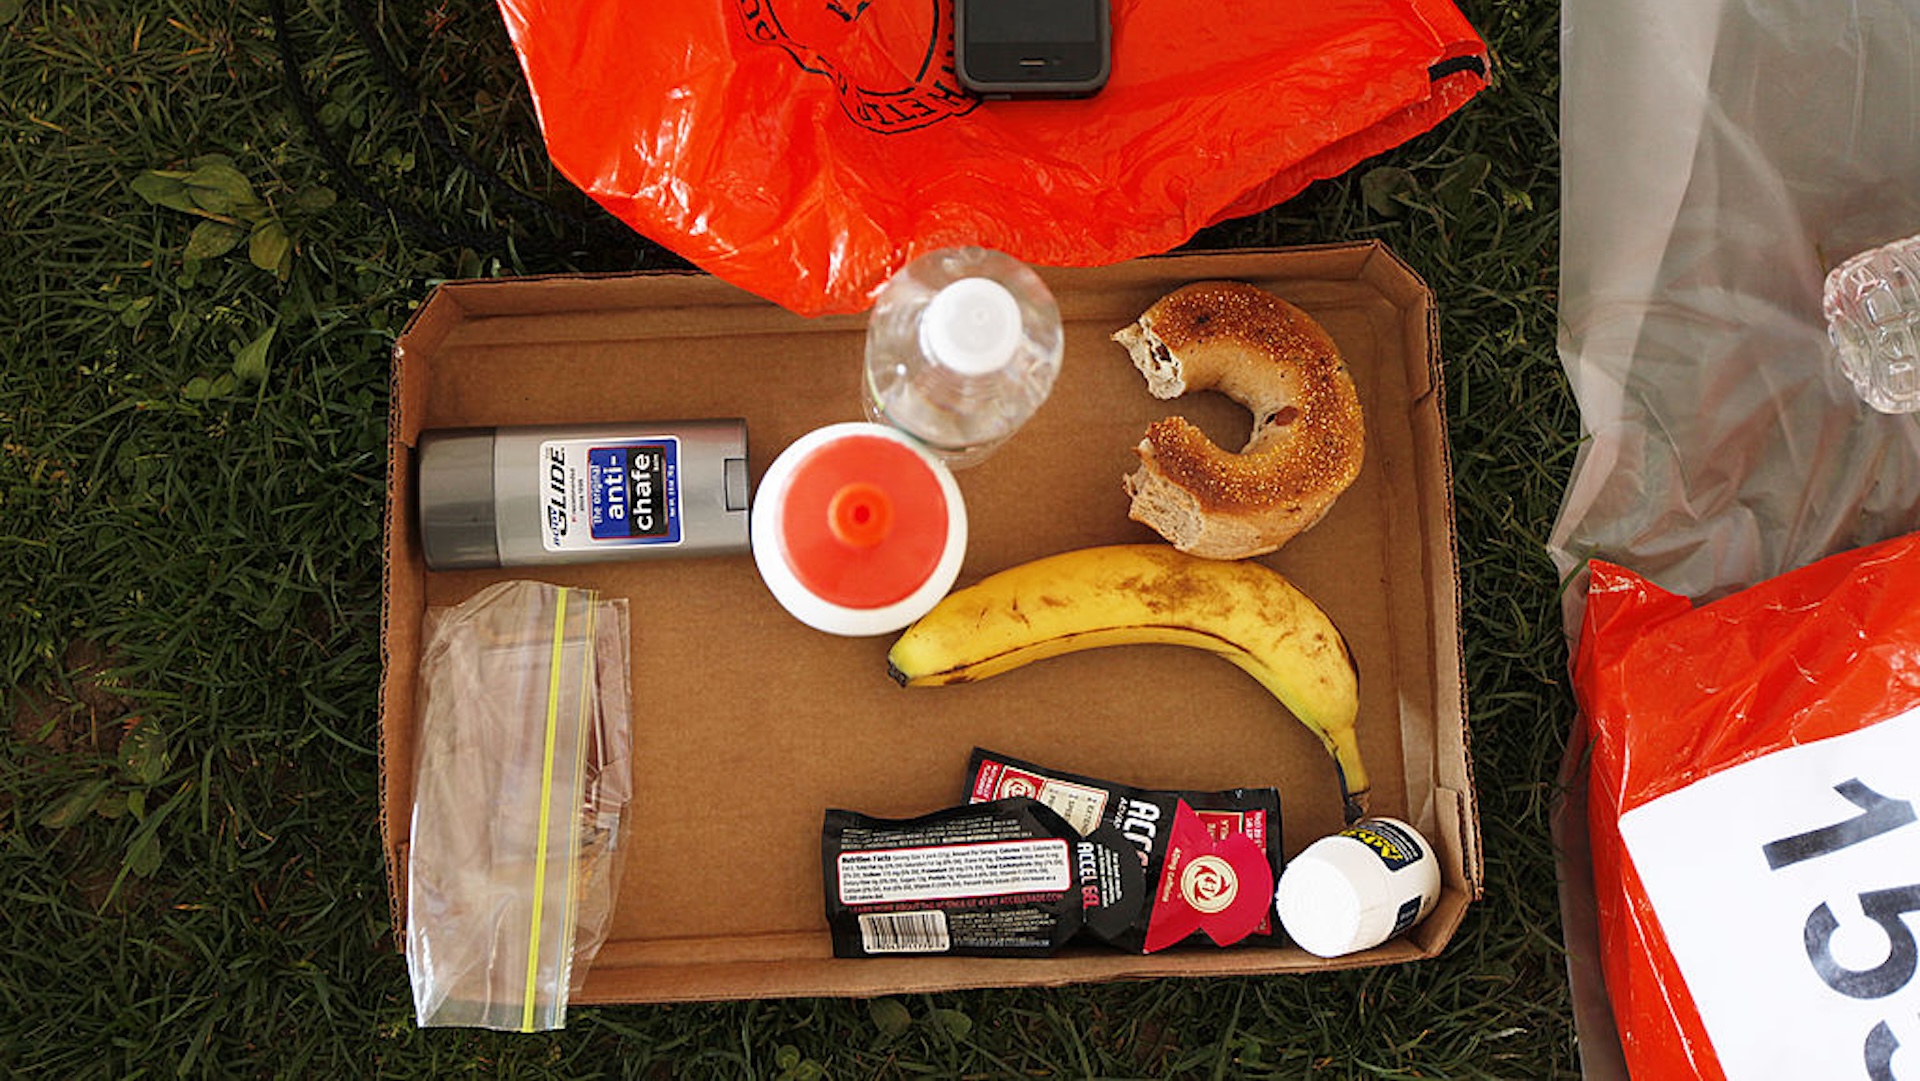 A box of essentials - body glide, water, bagel, banana, Advil, and Accel Gel. The 116th Boston Marathon starts in Hopkinton in Hopkinton, Mass. on Monday, April 16, 2012.